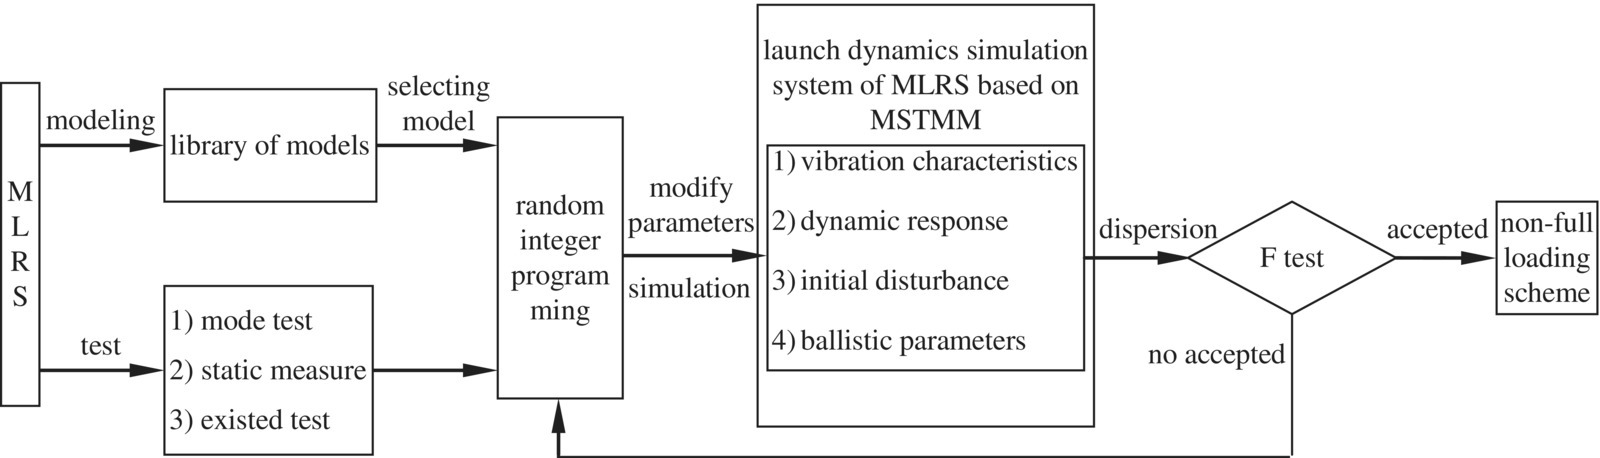 Flow diagram displaying arrows starting from a box labeled “MLRS” to 2 boxes labeled “library of models” and “1) mode test 2) static measure 3) existed test” leading to a box labeled “non-full loading scheme.”